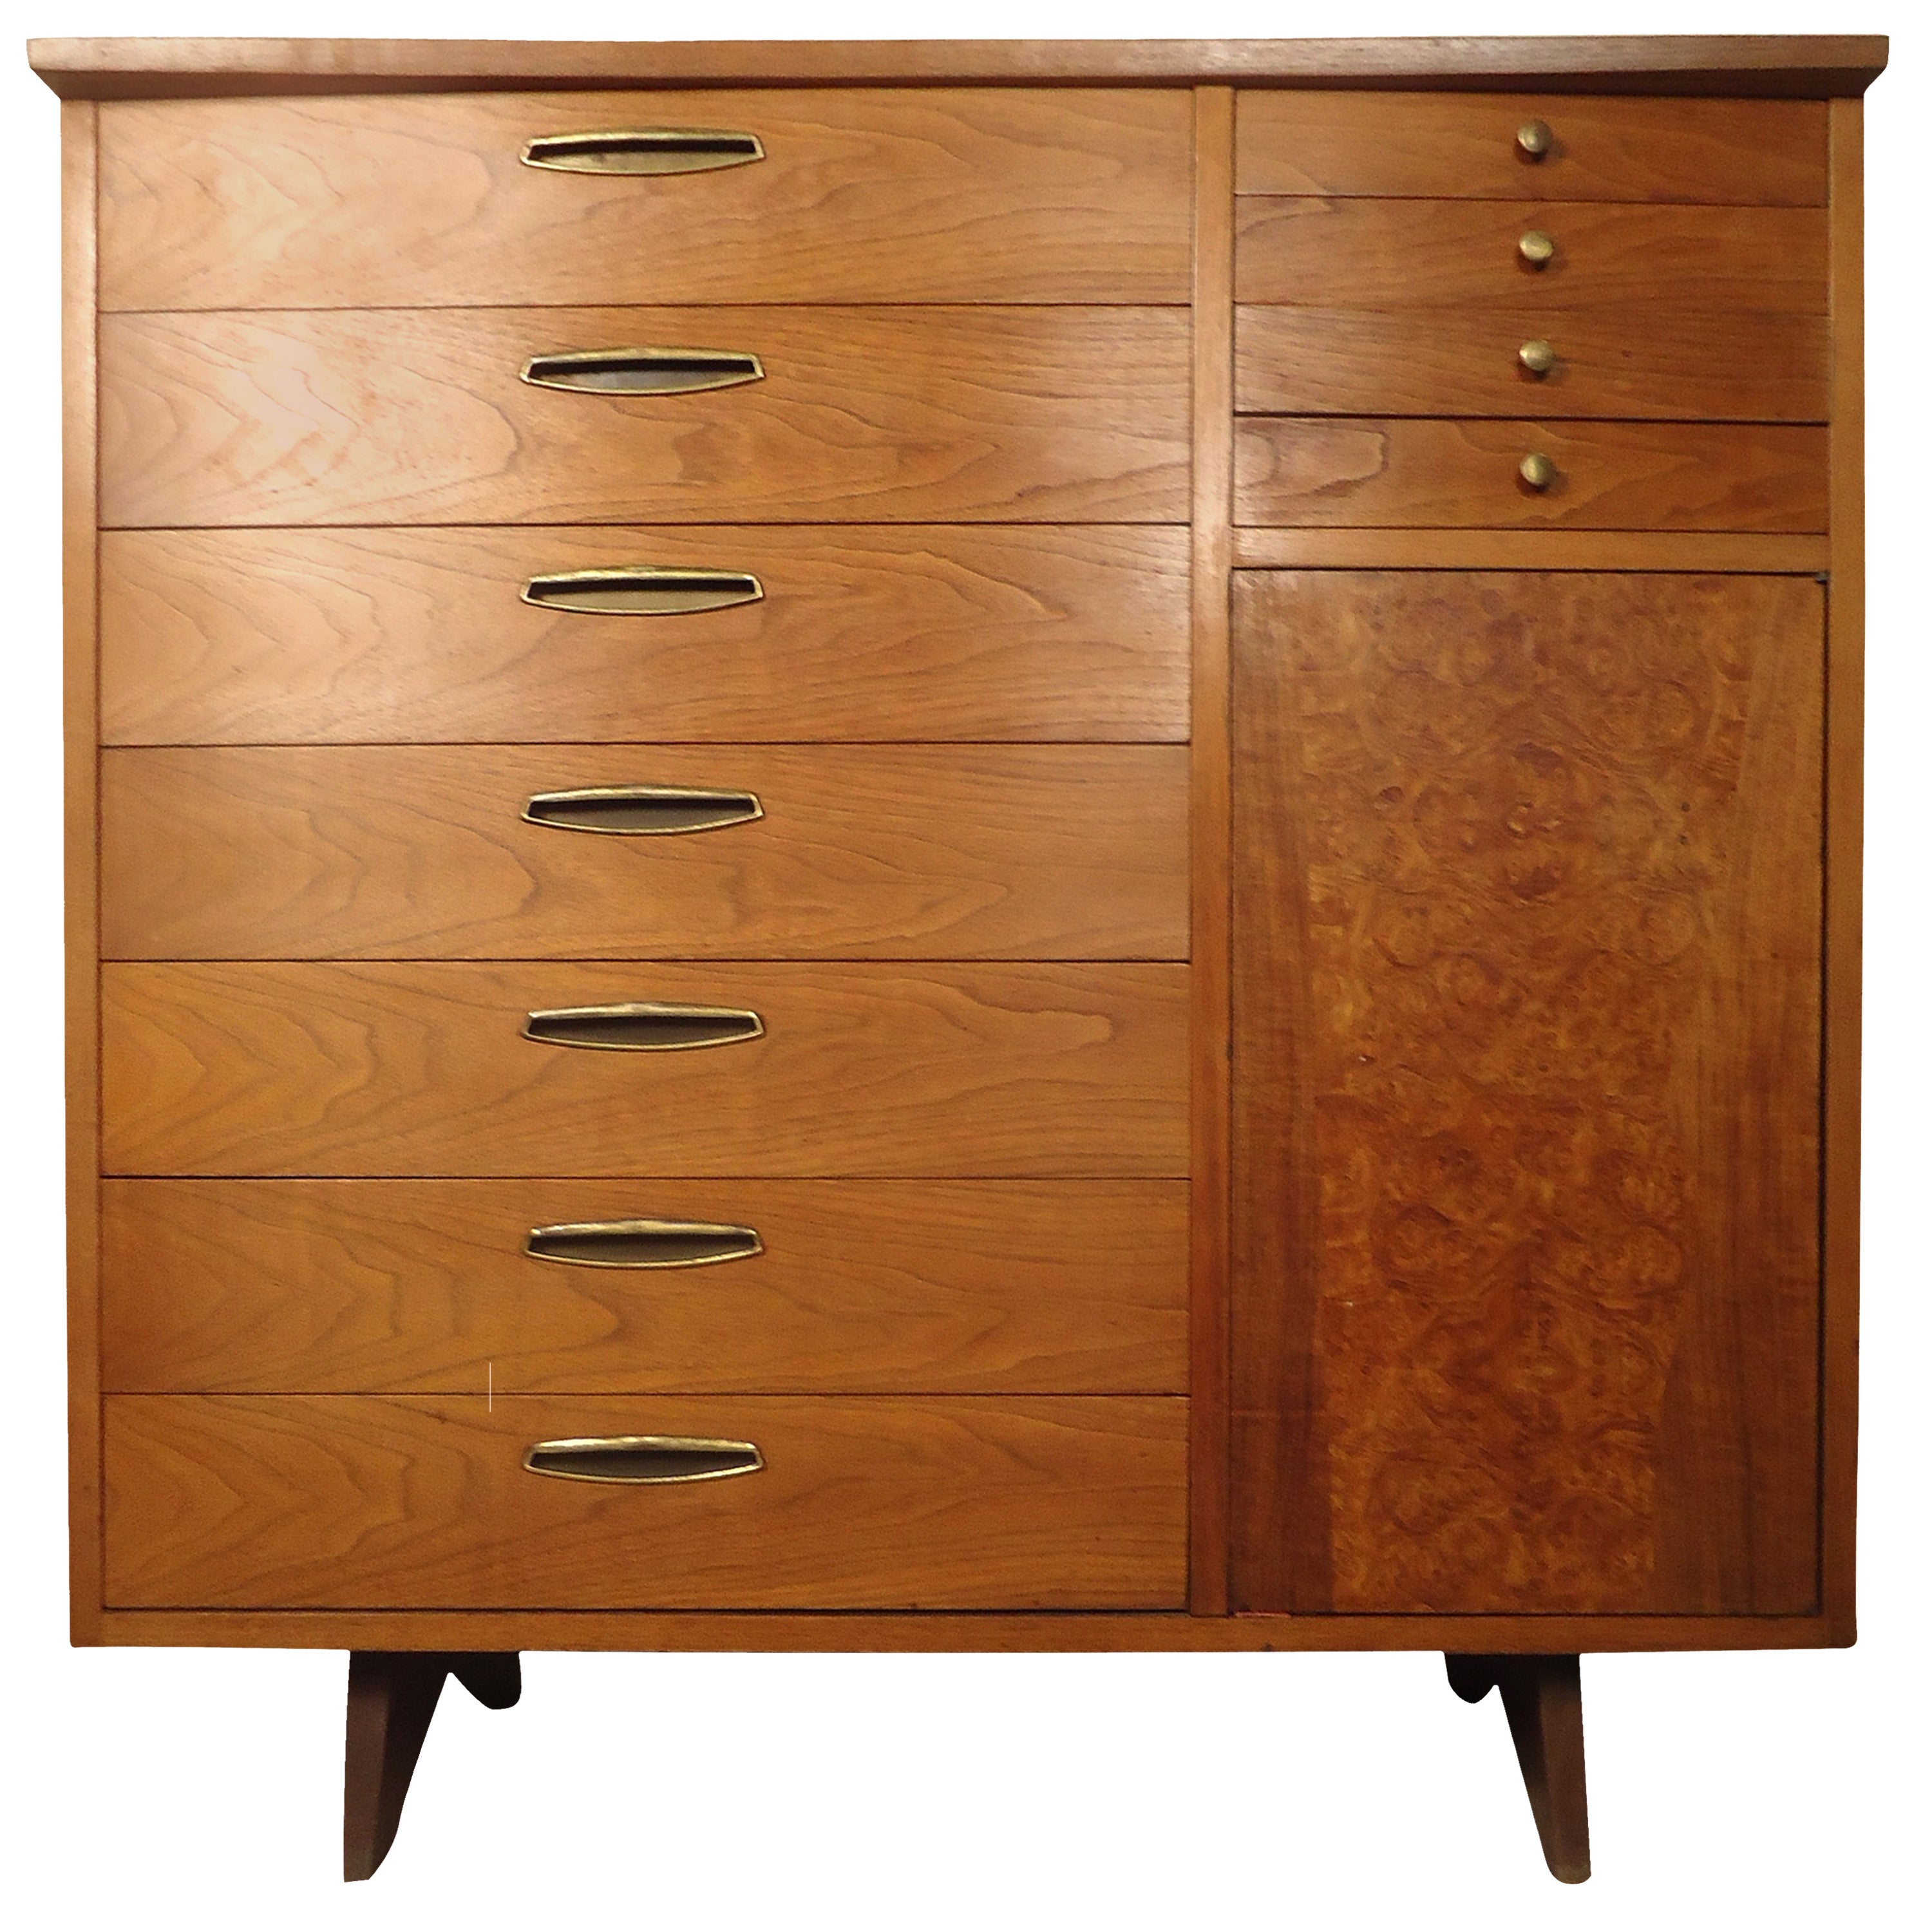 Excellent Dresser by Nakashima for Widdicomb